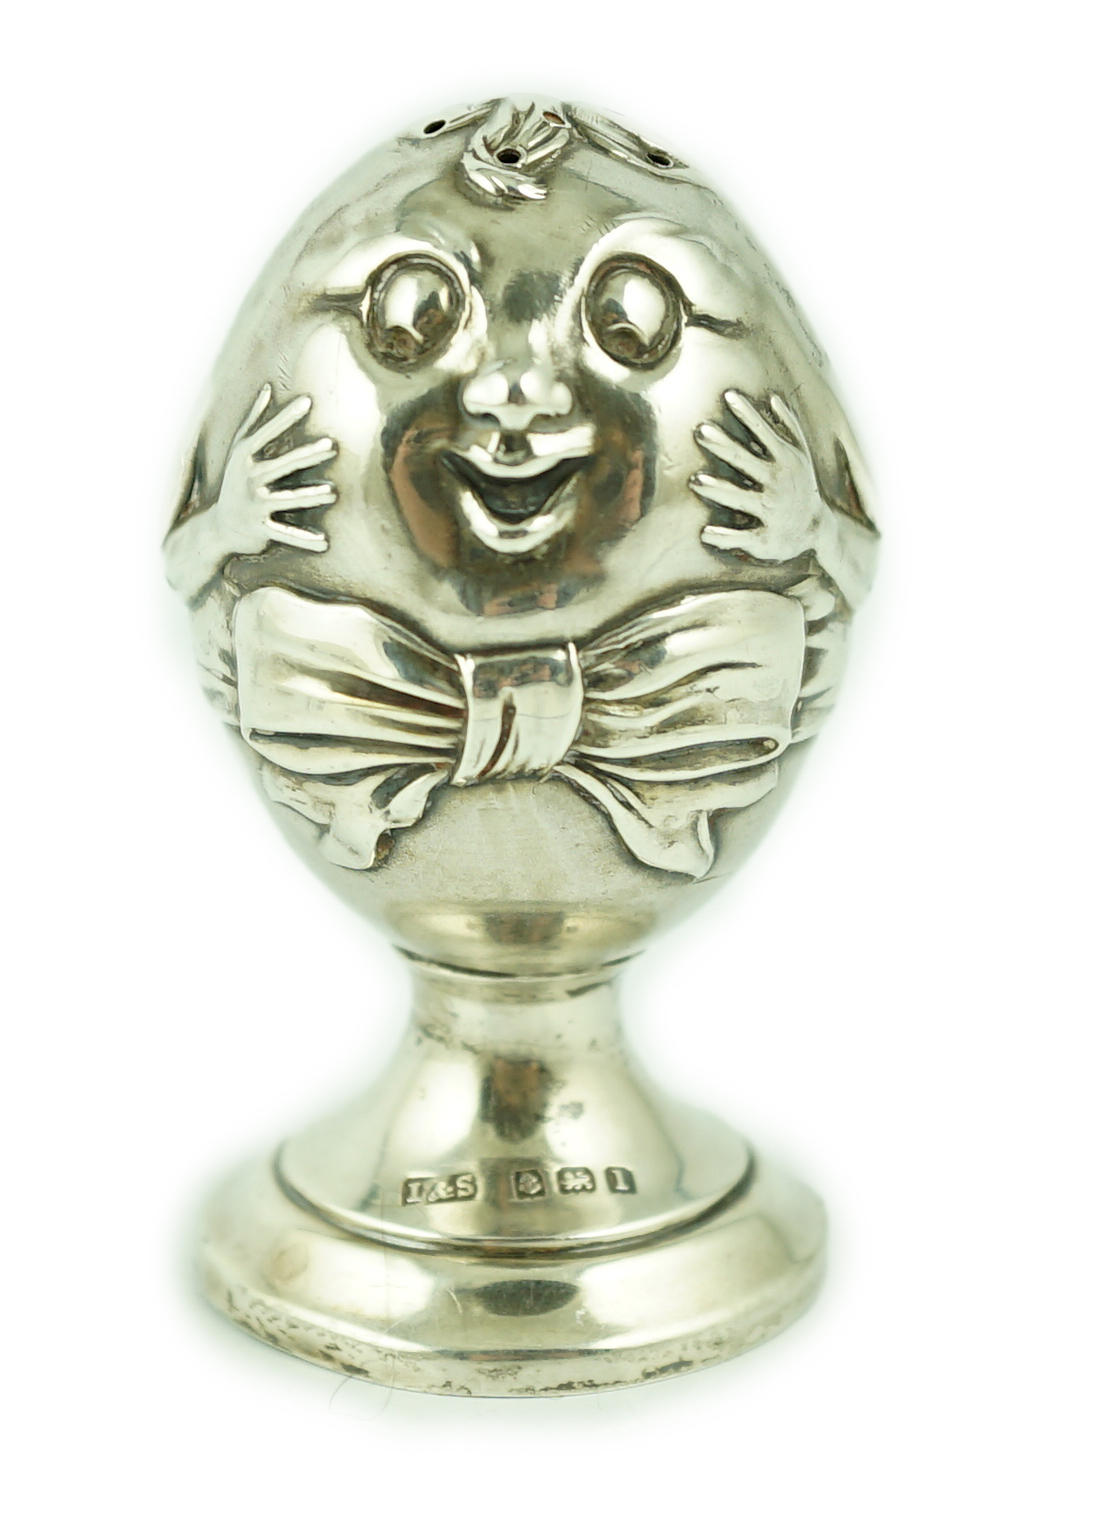 A George V novelty silver pepperette, modelled as Humpty Dumpty, by Levy & Salaman